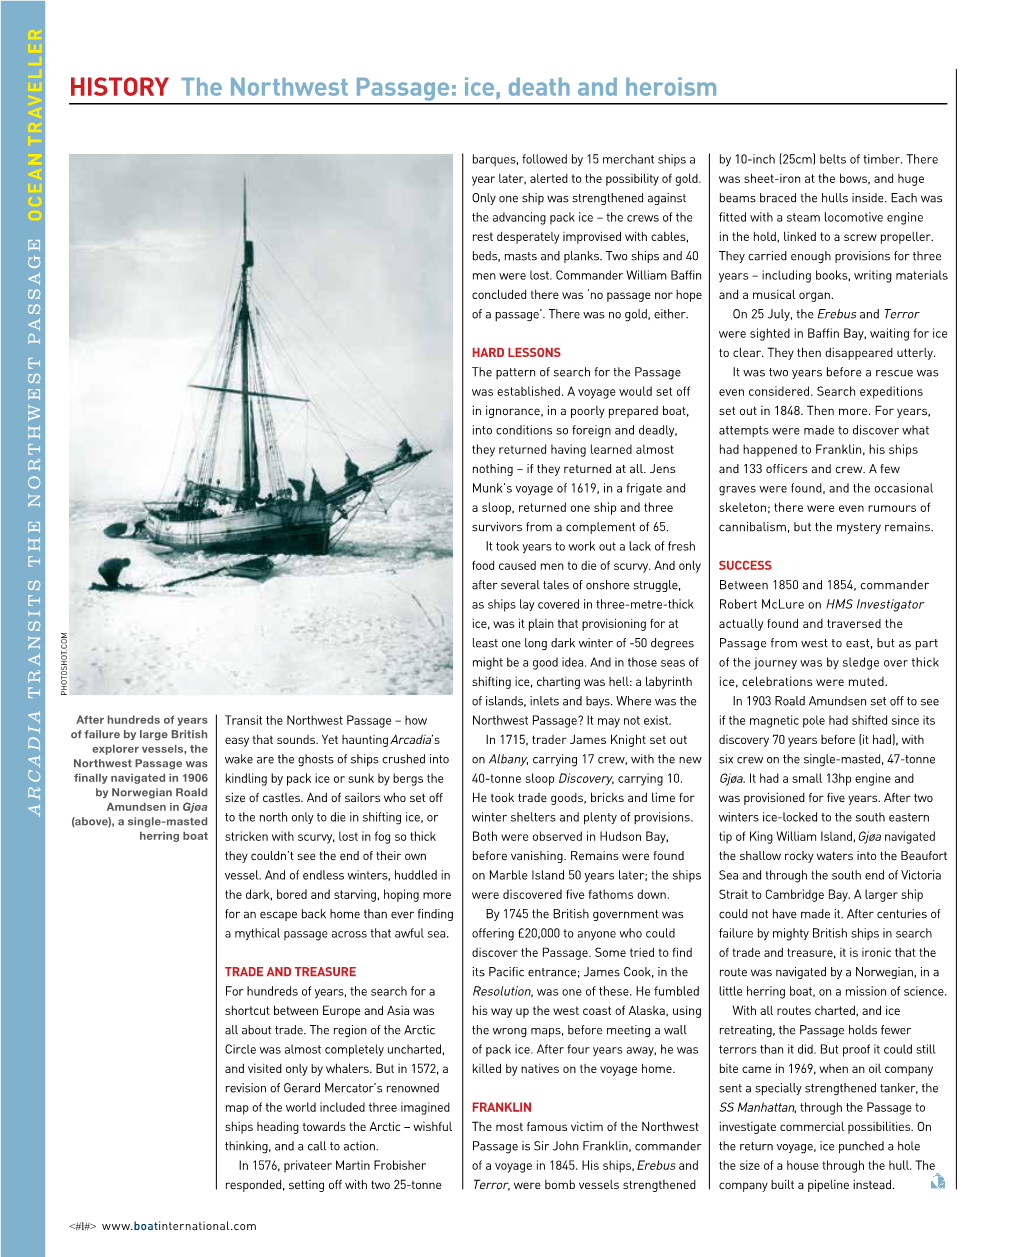 HISTORY the Northwest Passage: Ice, Death and Heroism